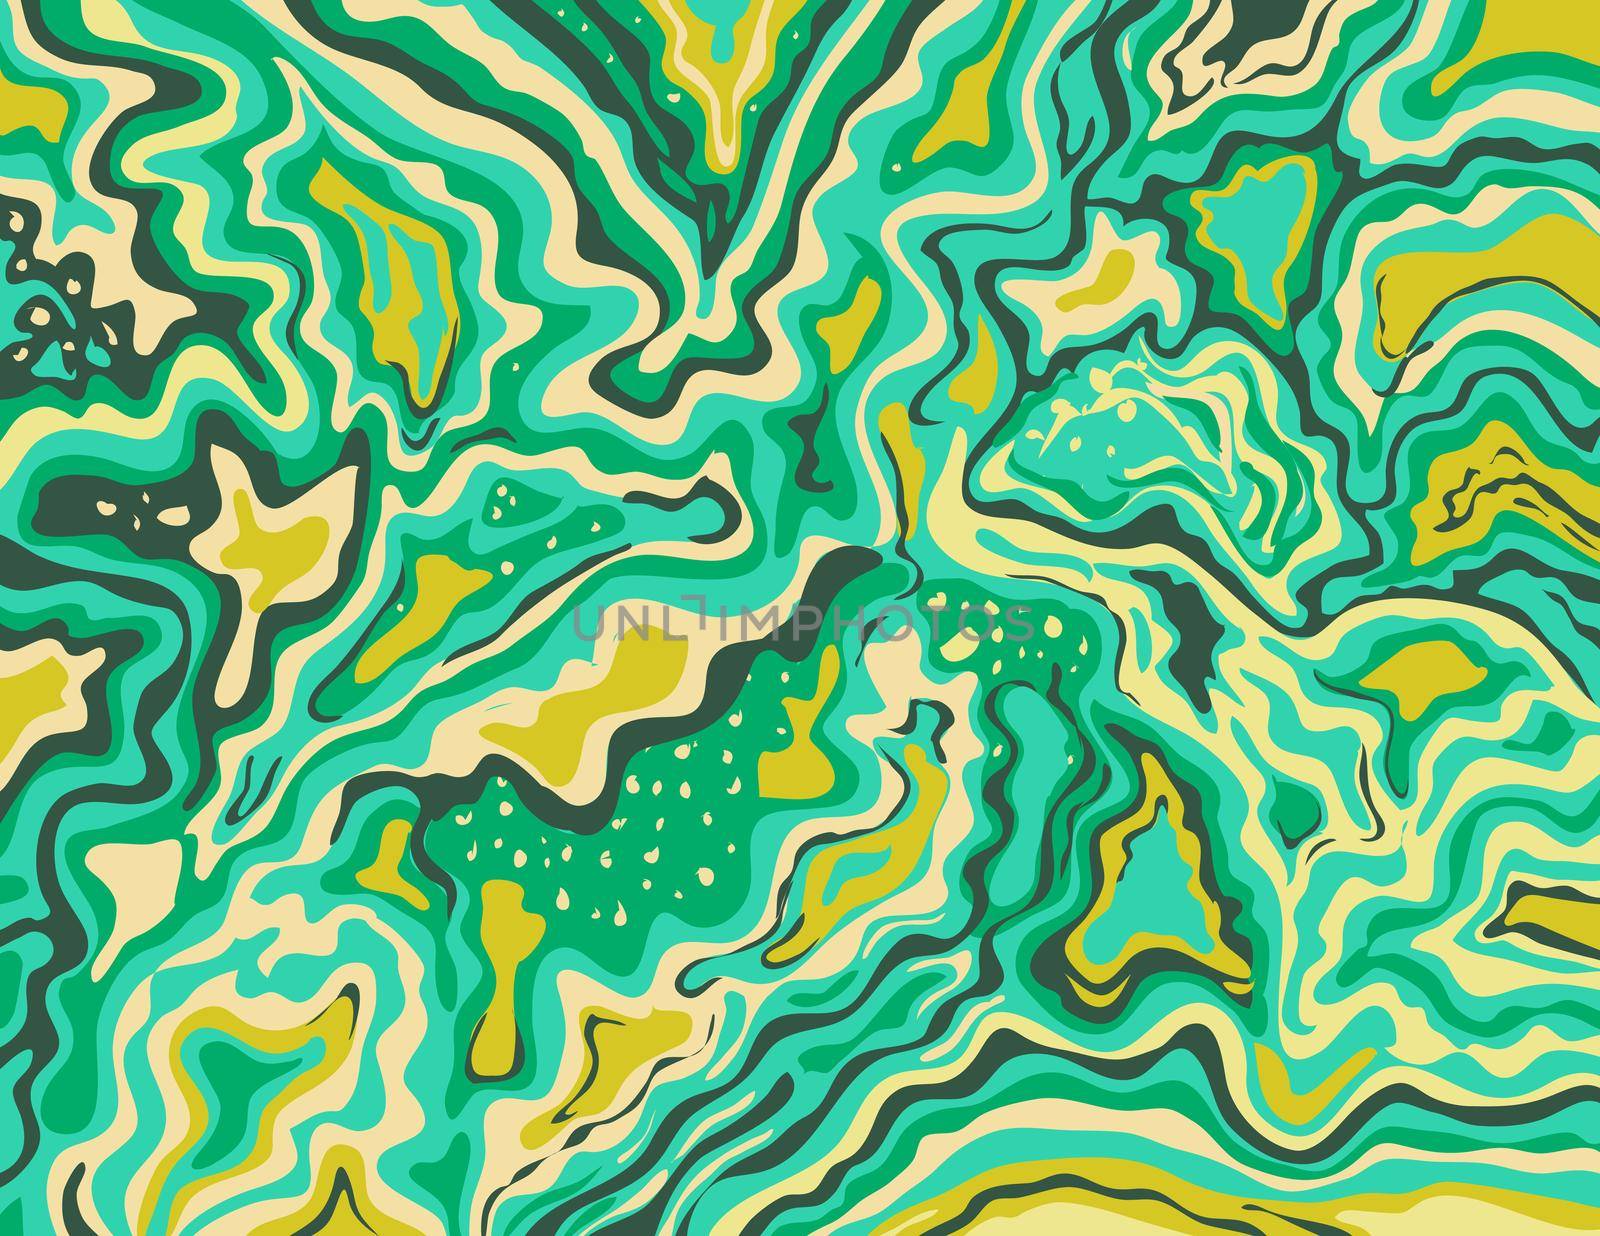 Digital marbling or inkscape illustration of an abstract swirling,psychedelic, liquid marble and simulated marbling in the style of Suminagashi Kintsugi marbled effect in Aquamarine artic lime color
